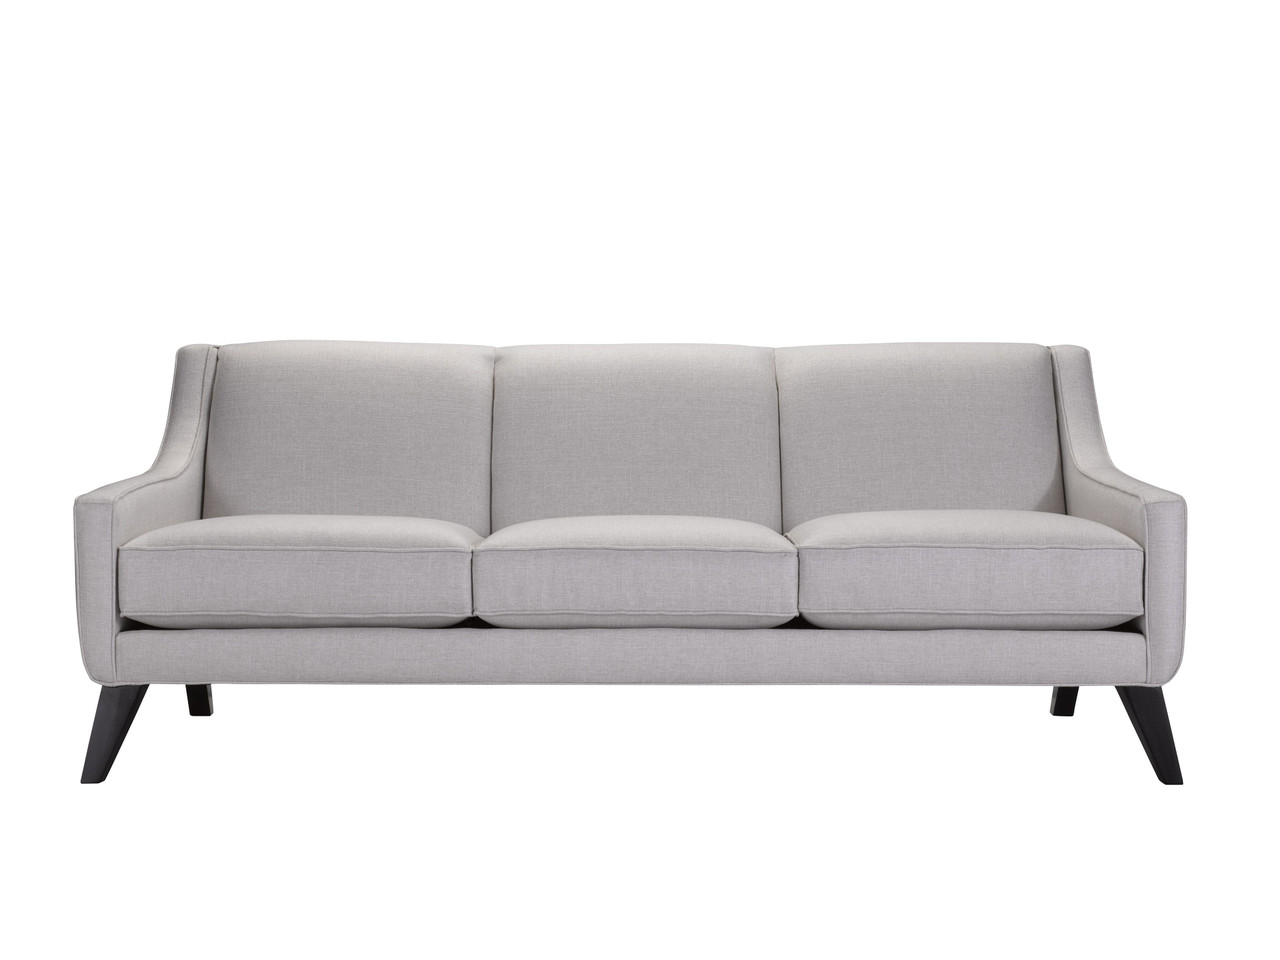 lily sofa bed review